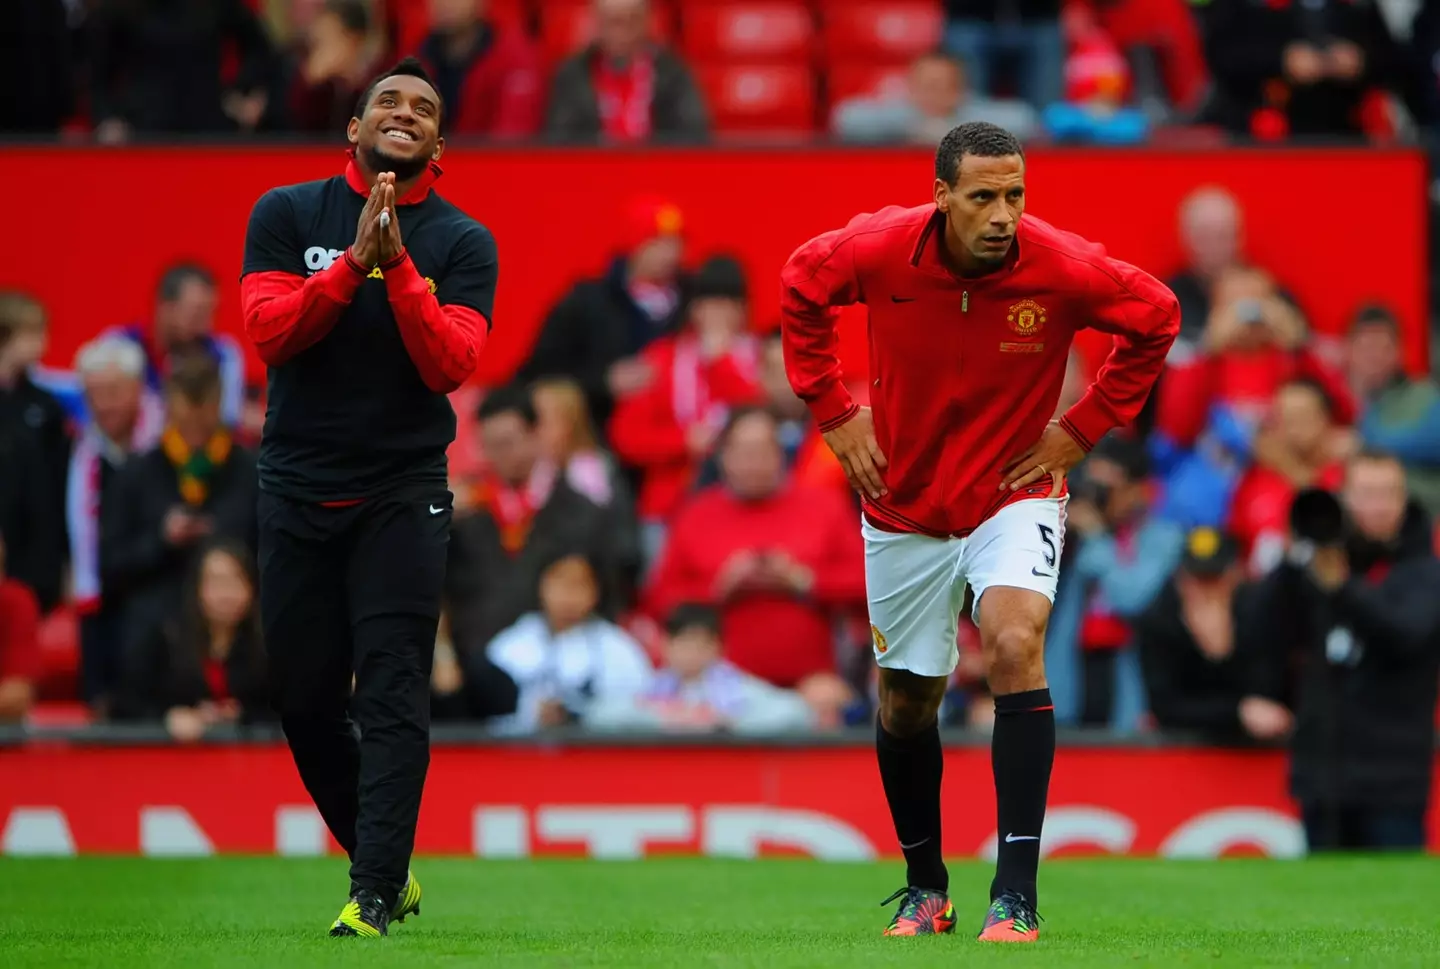 Ferdinand alongside Anderson, one of the United players who did wear the t-shirt. (Image